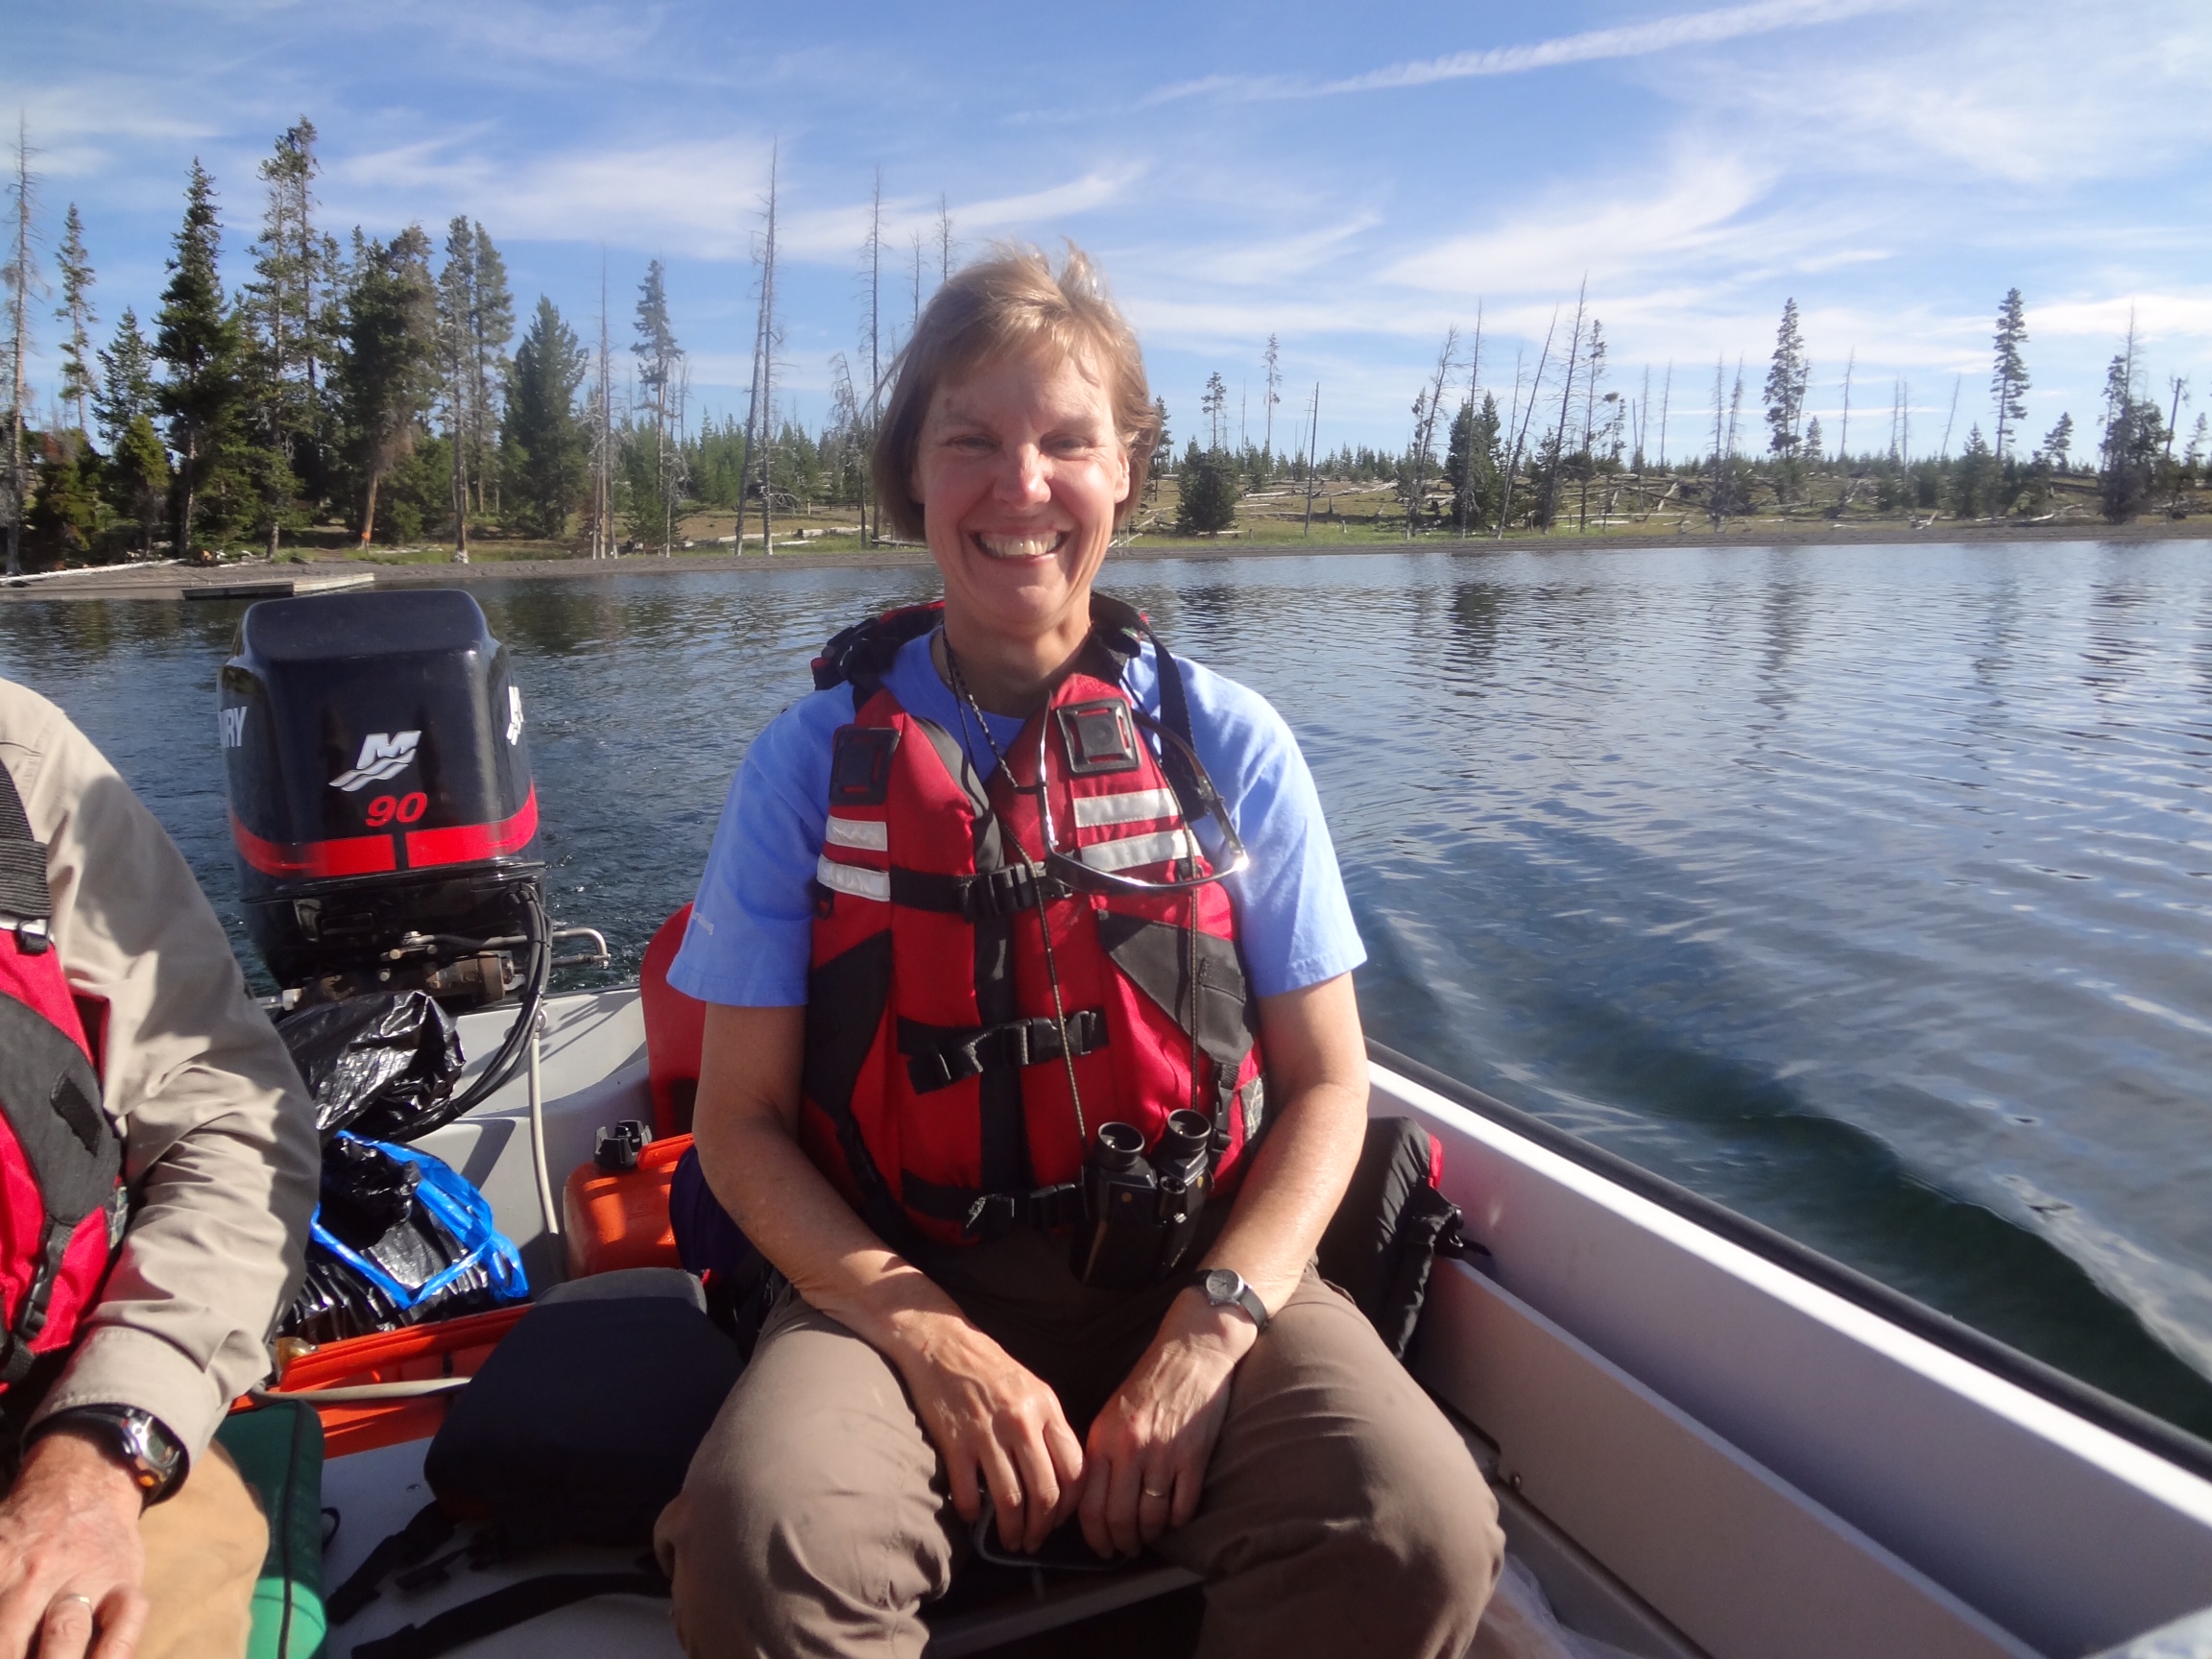 Landscape ecologist Monica Turner travels in her team’s boat, PICO1, across Yellowstone Lake in Yellowstone National Park in July 2012 to access long-term study plots in areas that burned during the 1988 Yellowstone Fires. Named for Pinus contorta, the lodgepole pines that dominate Yellowstone’s forests, PICO1 gets Turner and her group to remote study areas that are more easily reached from the lakeshore. The July trip was part of a major resampling of long-term plots 25 years after the 1988 fires. Turner took over the presidency of the Ecological Society of America in August, 2015, and will serve one year. Credit, Monica Turner.